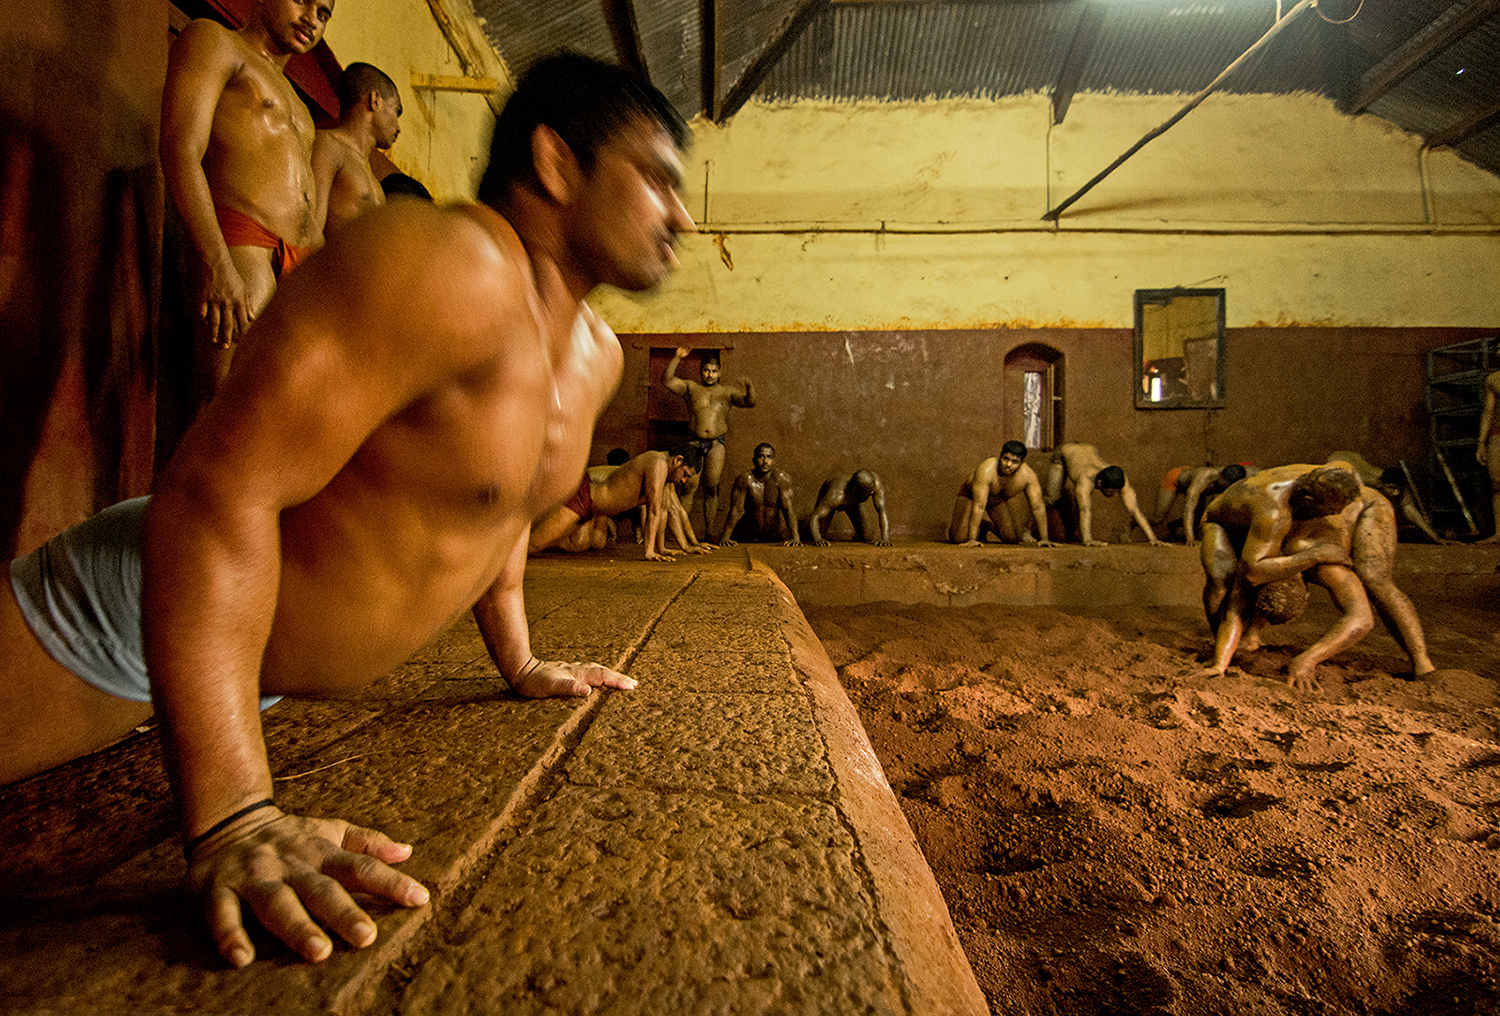 They have 2 training sessions everyday. 3 pairs of wrestlers get on the mud to practice at the same time while the rest of them engage in work outs. They take turns to get on the mud